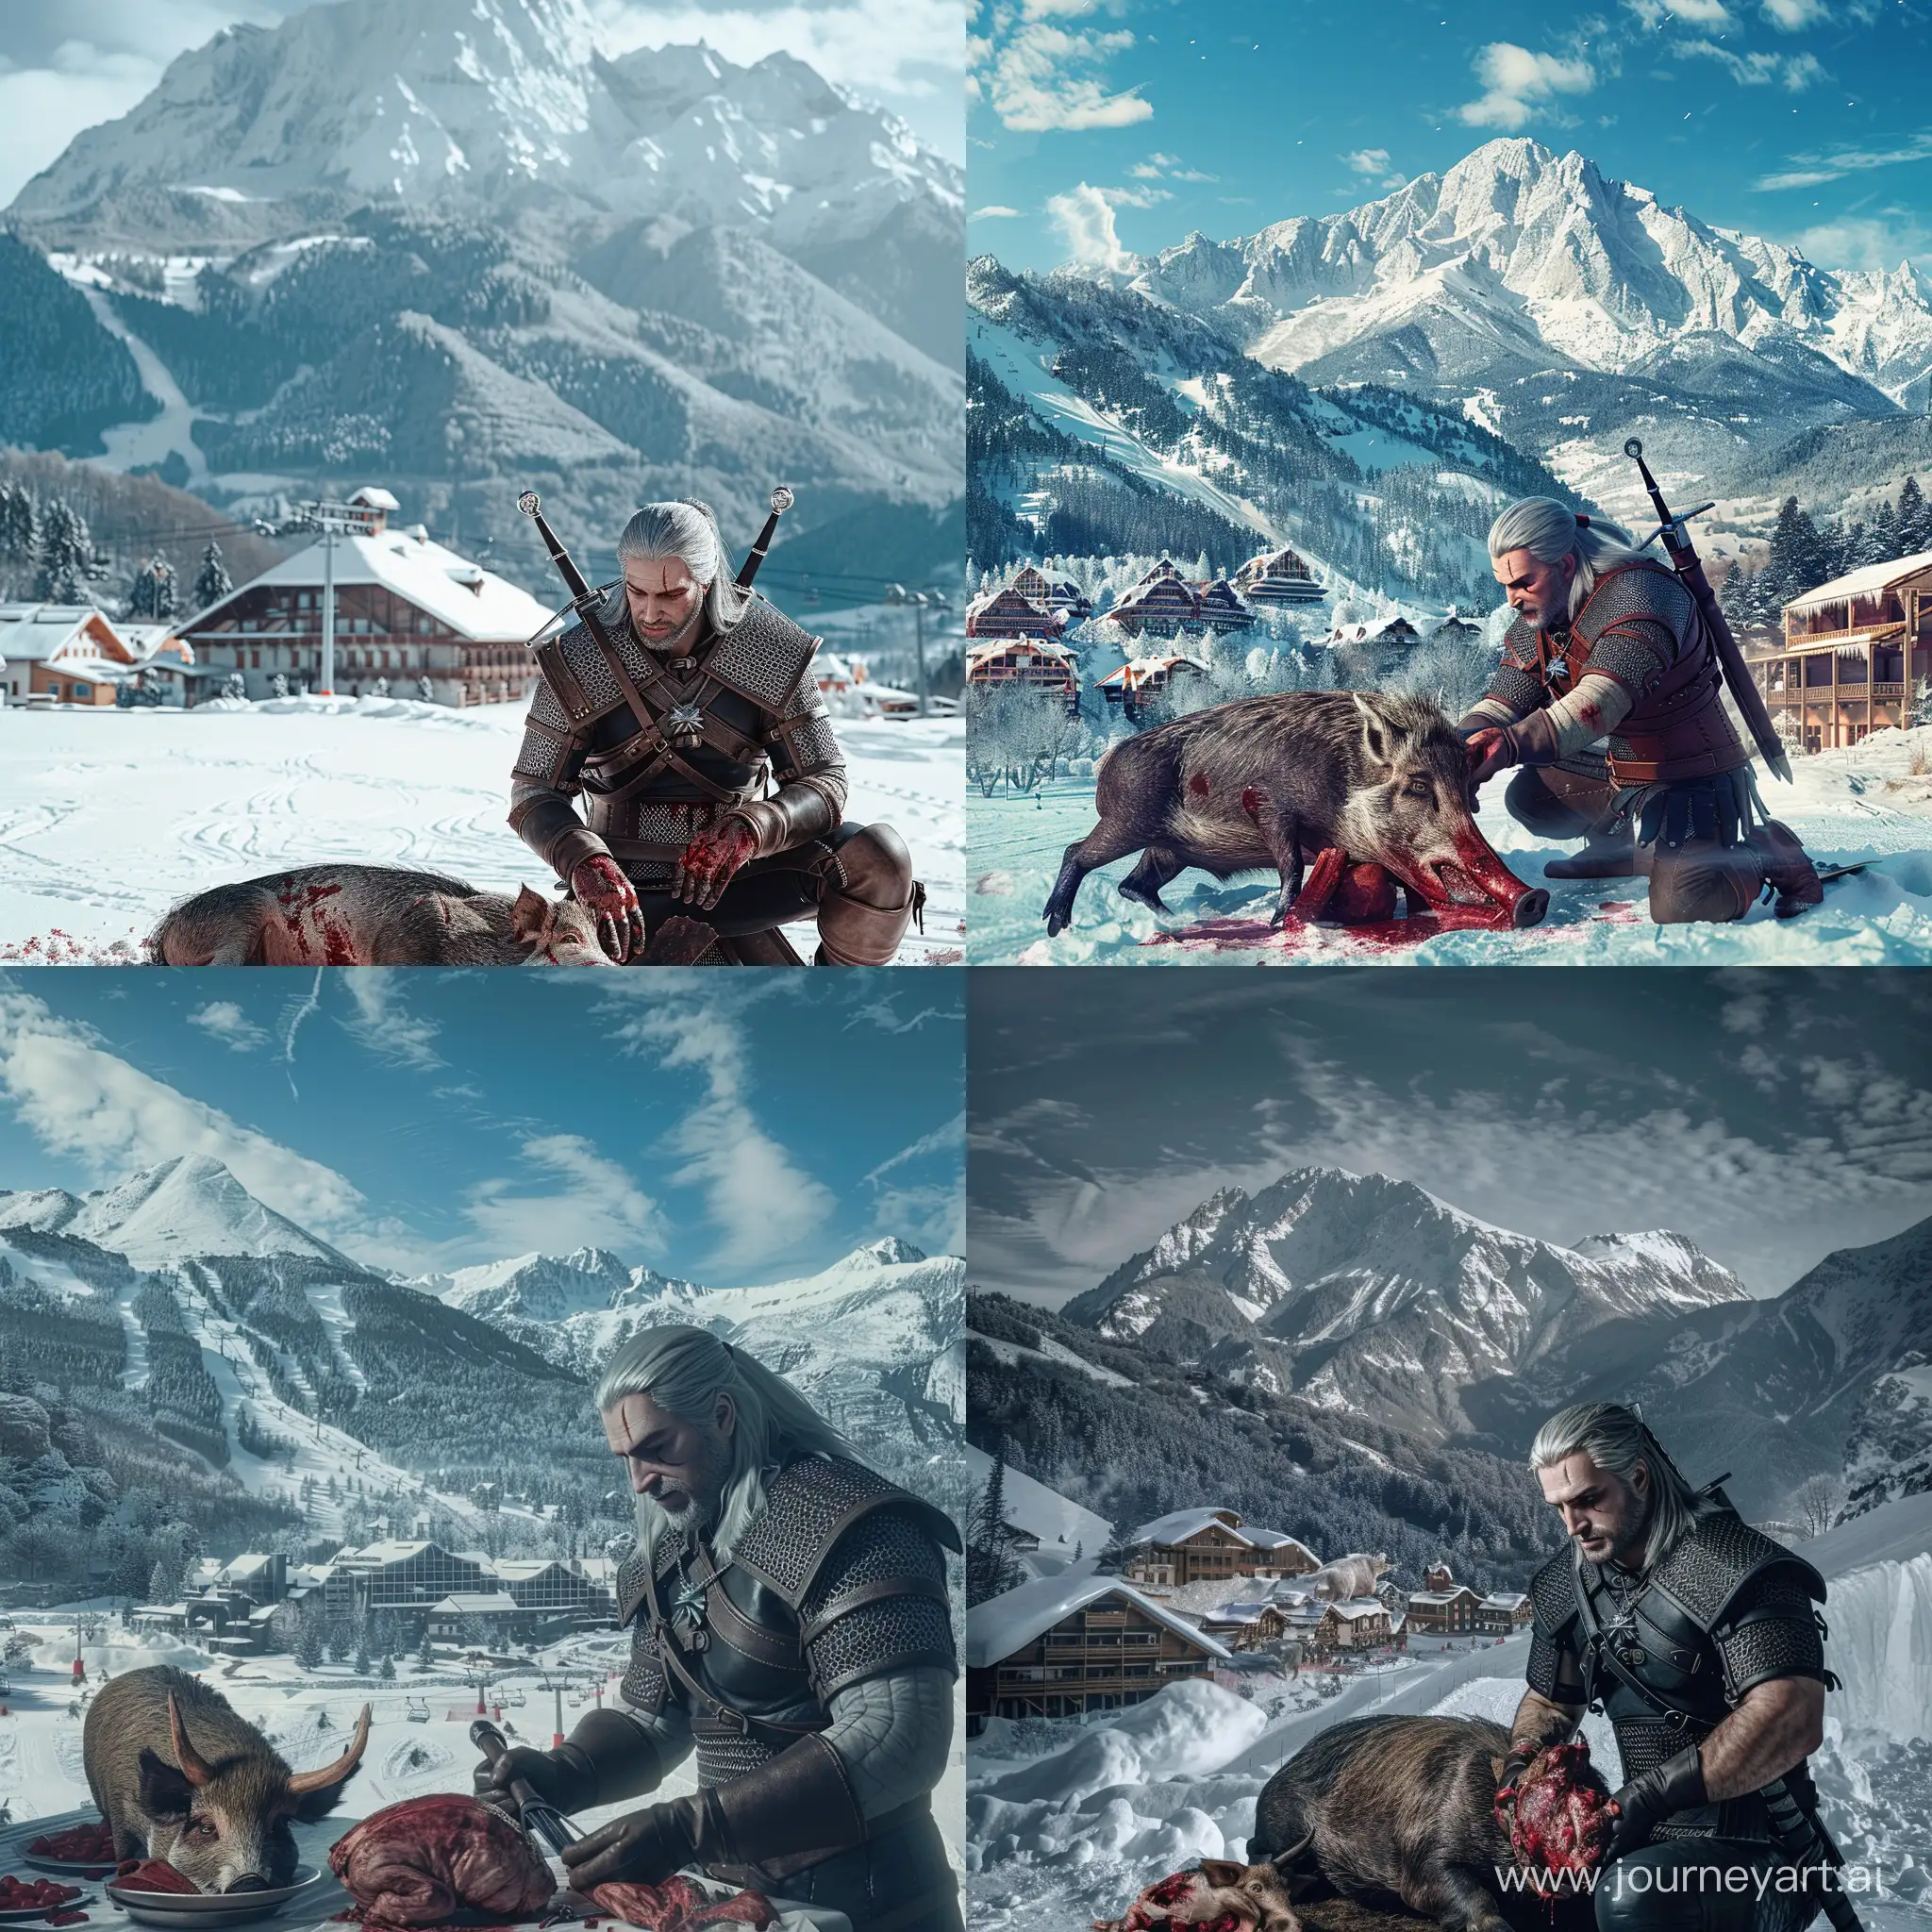 photo in realistic style: Geralt of Rivia butchers a boar against the background of snowy mountains and ski resort. — commercial photography — magazine photography — glamour photography 